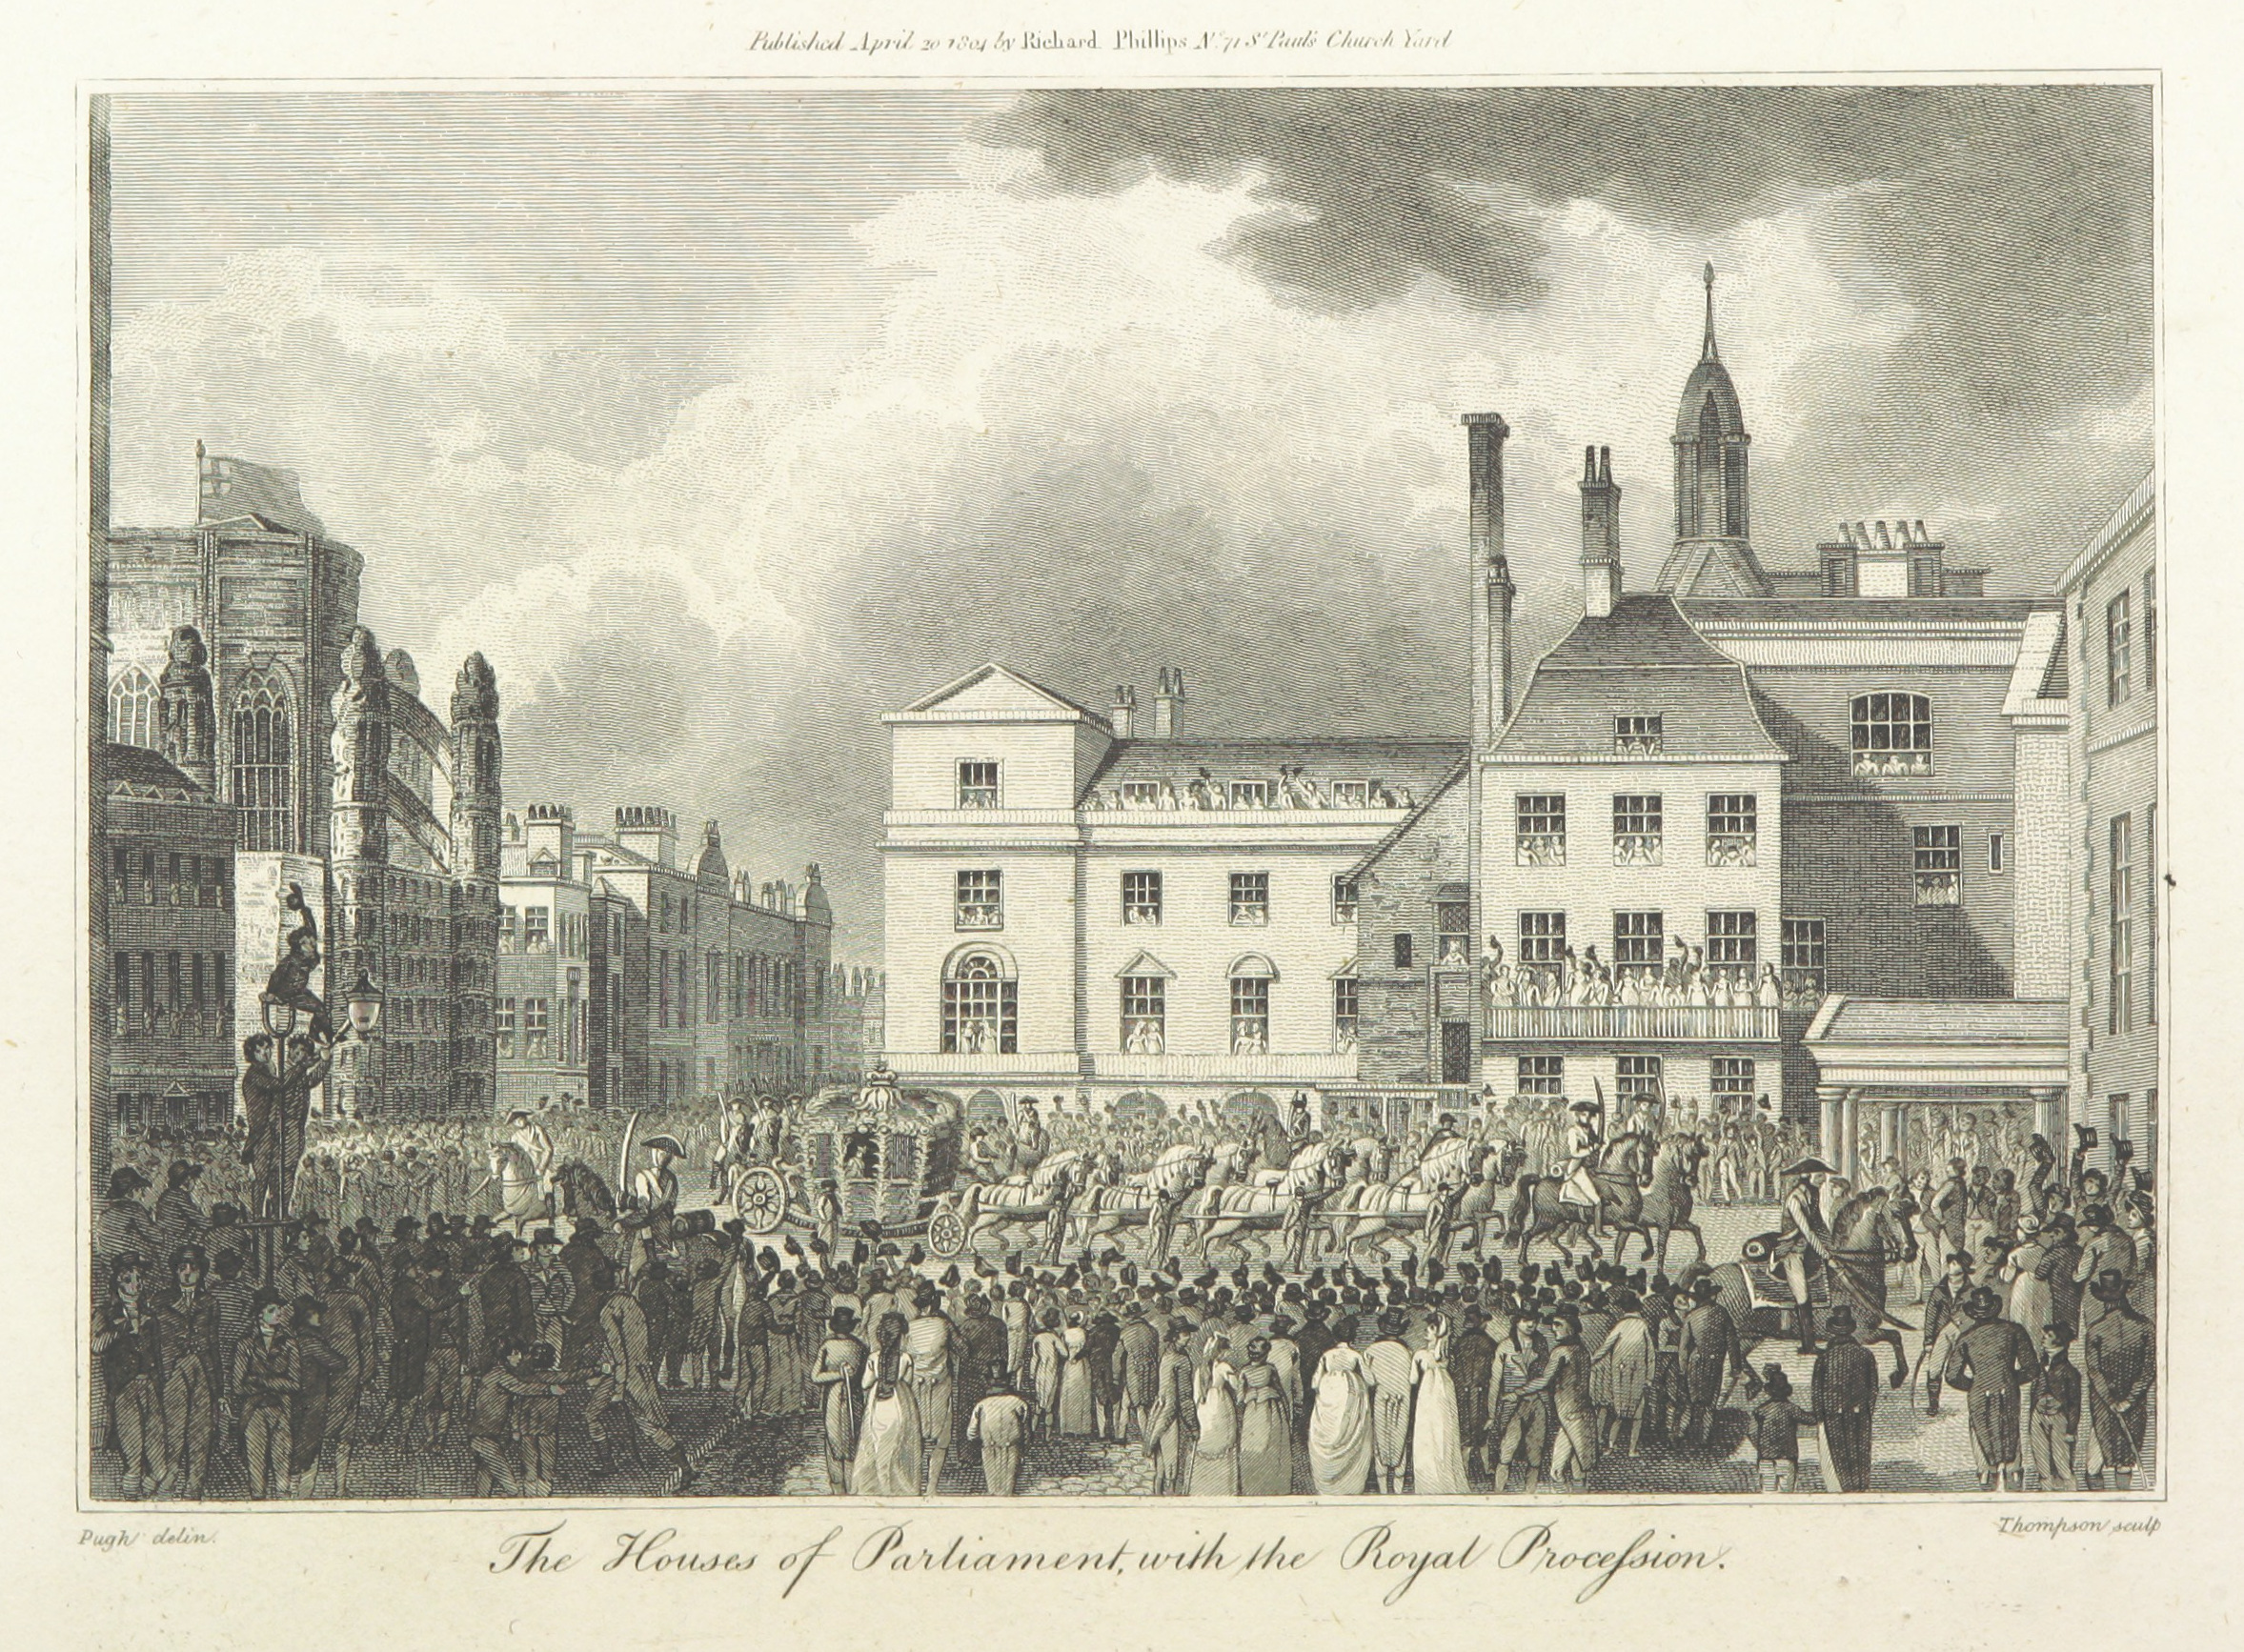 Phillips(1804)_p288_-_The_Houses_of_Parliament_with_the_Royal_Procession